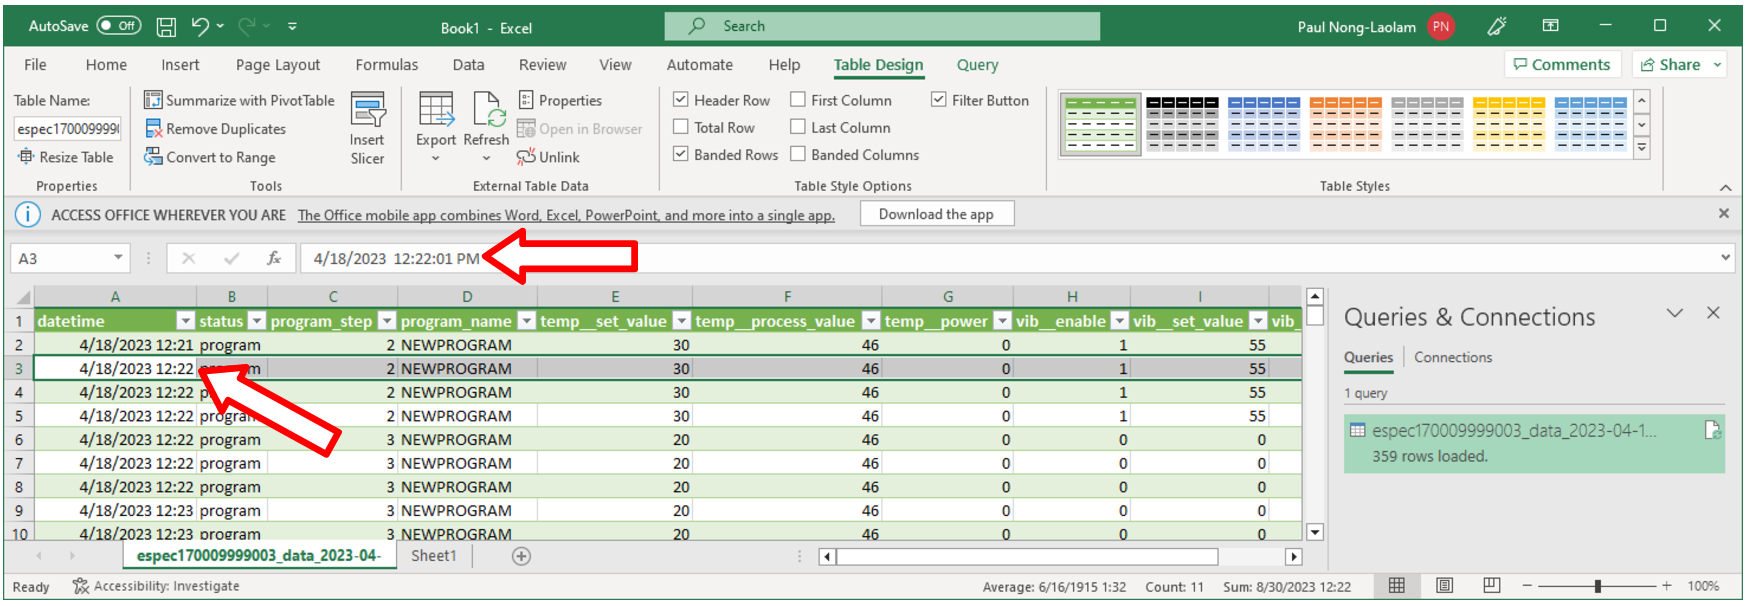 Data file properly imported into MS Excel